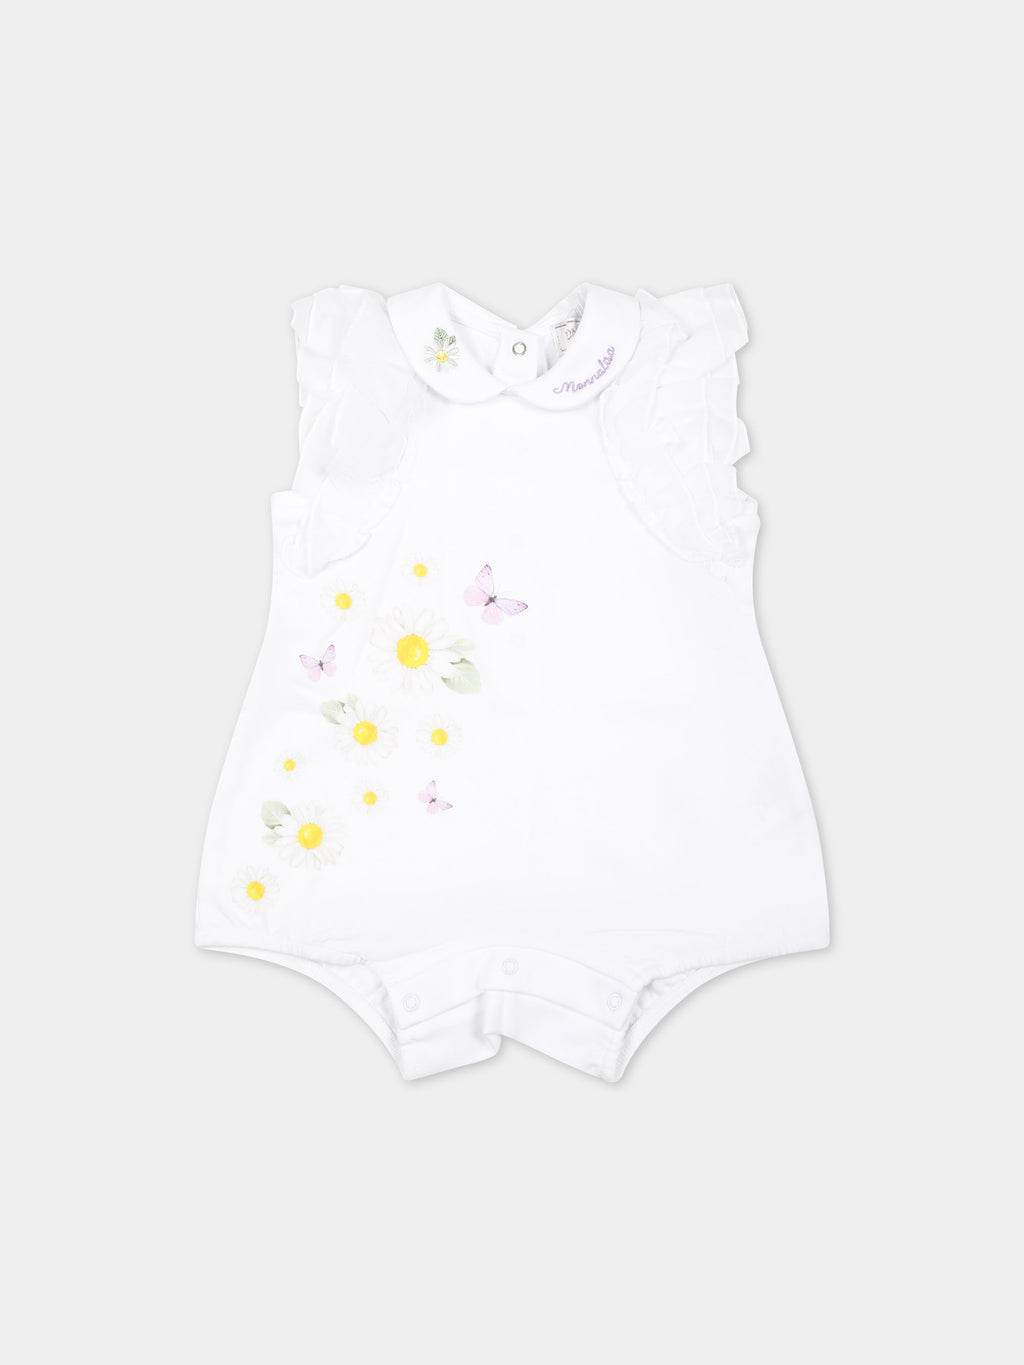 White romper for baby girl with daisy print